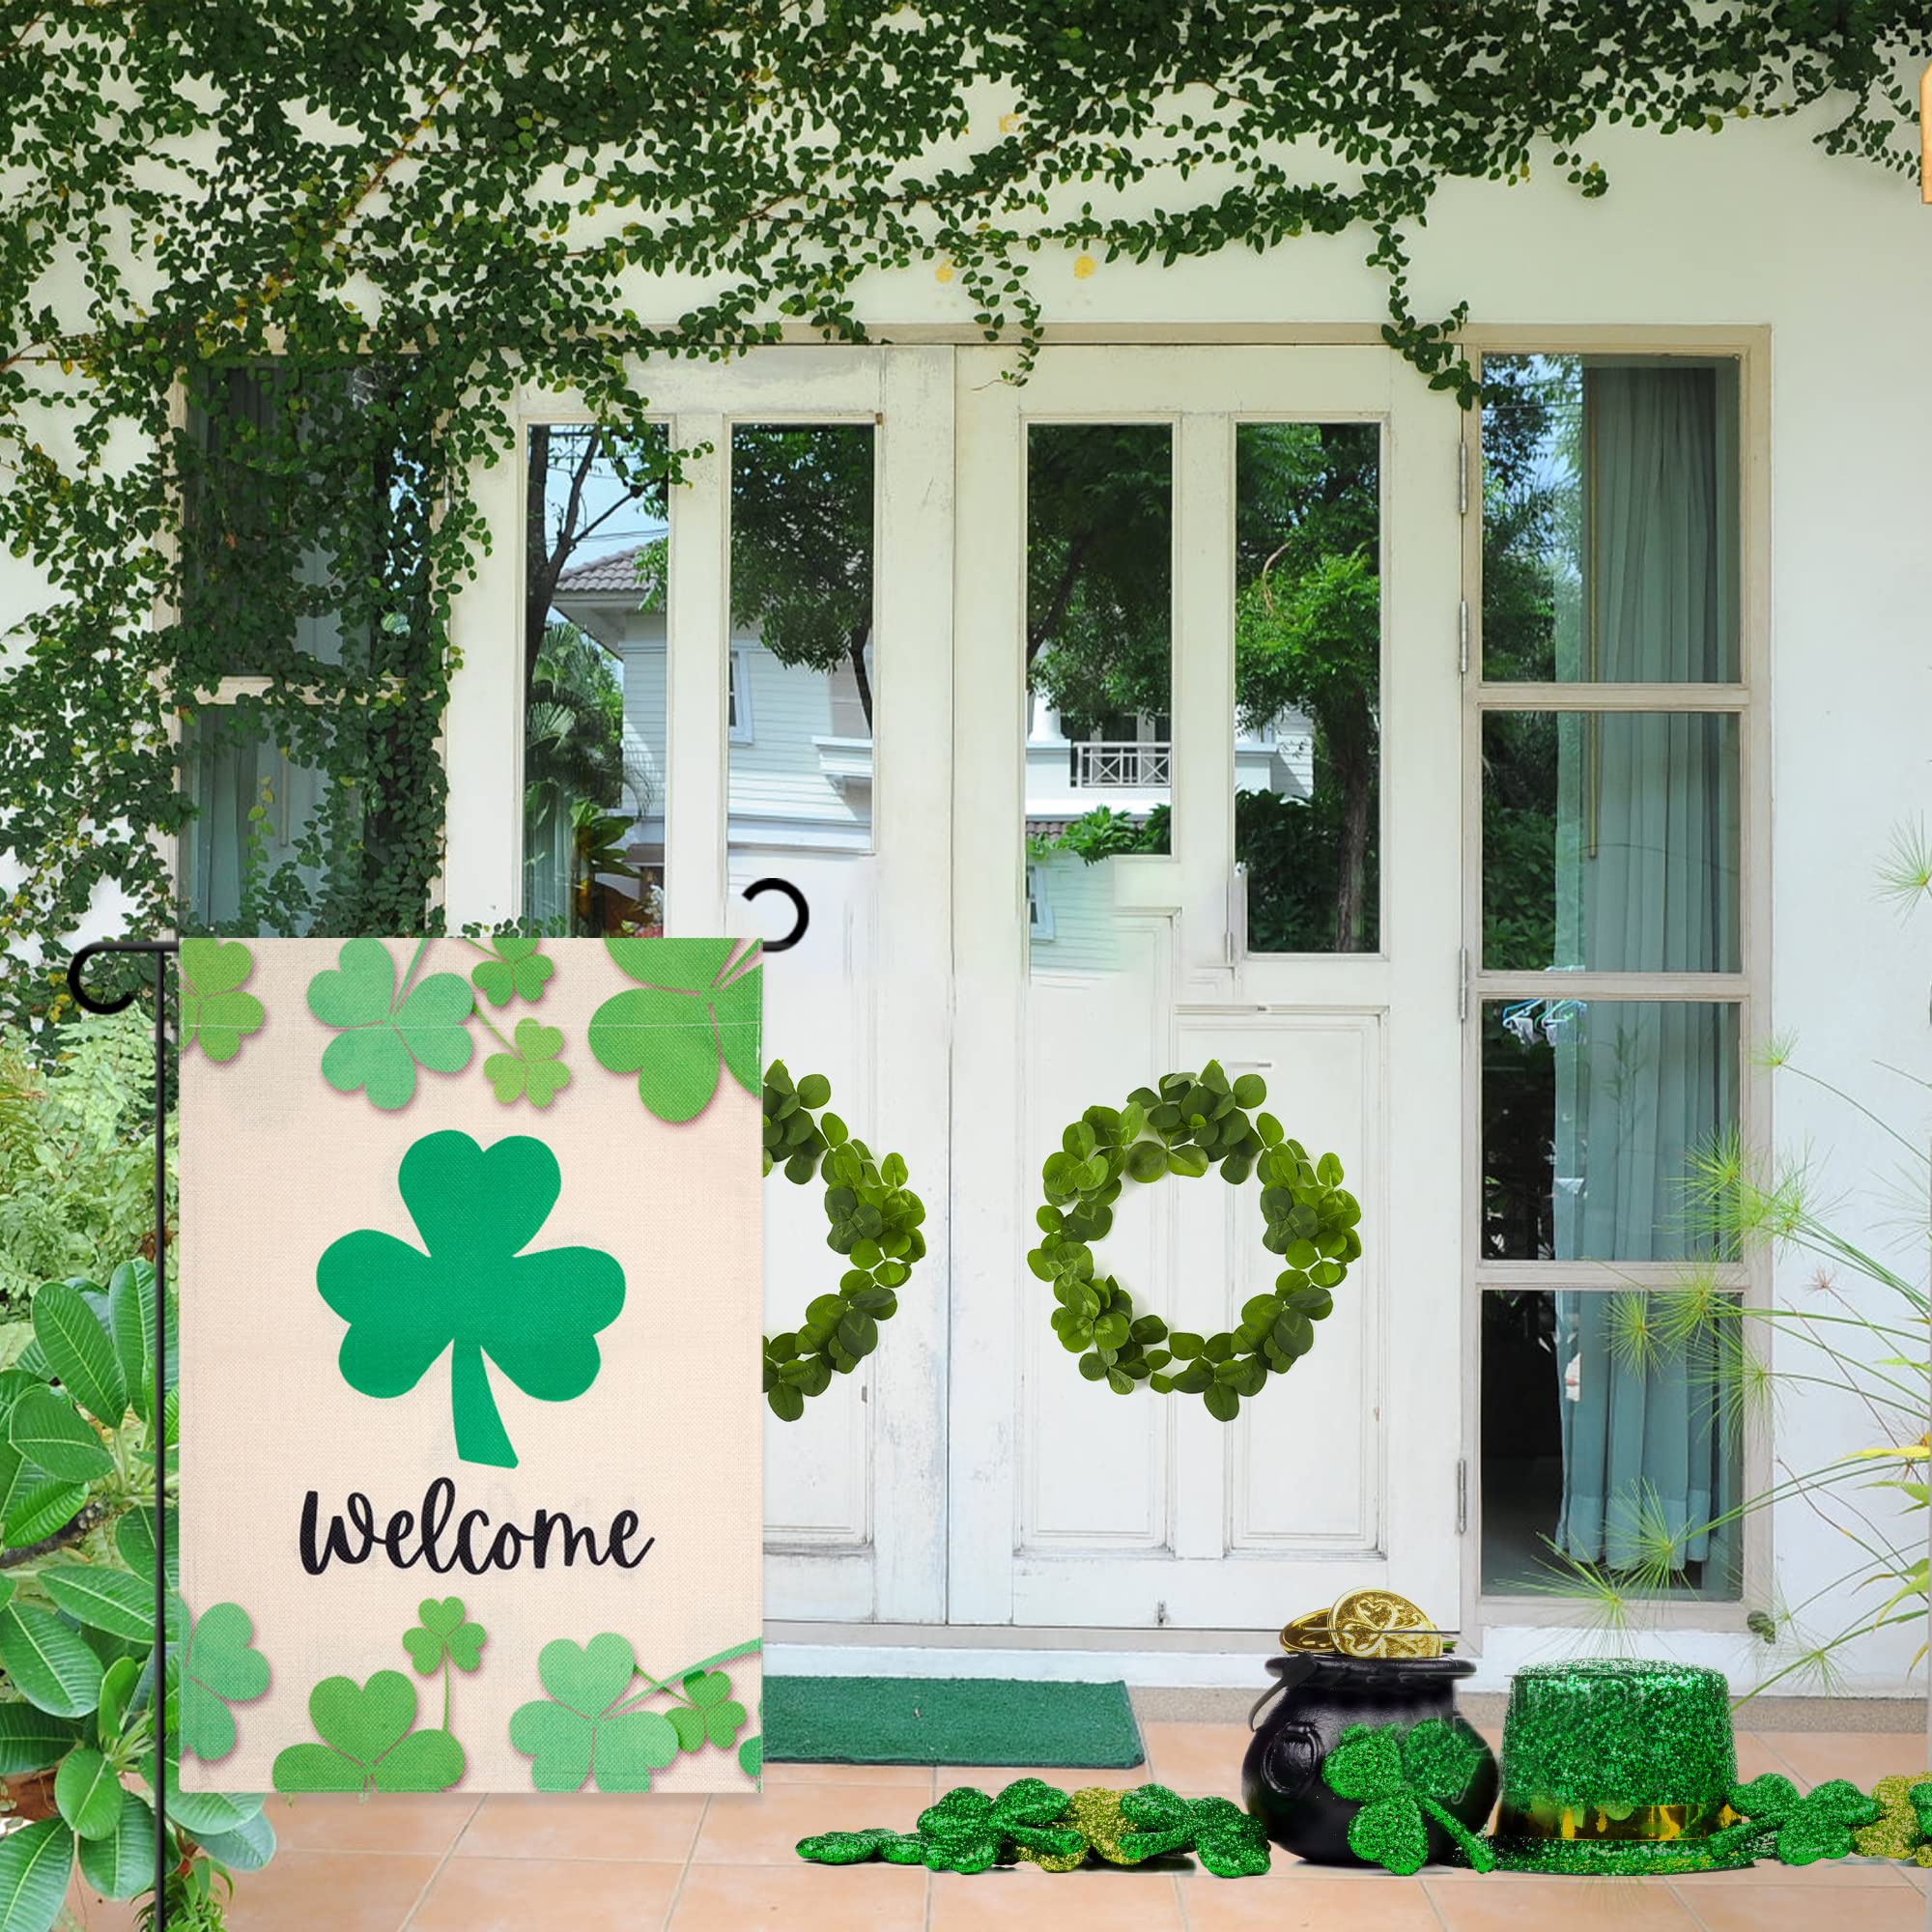 WBCBEC 1PCS St Patrick's Day Garden Flag Welcome Shamrocks Clover Vertical Shamrock Yard Outdoor Flag Irish Small Burlap House Flag for Outside Holiday Decor(12.5 x 18 Inch, Double Sided)